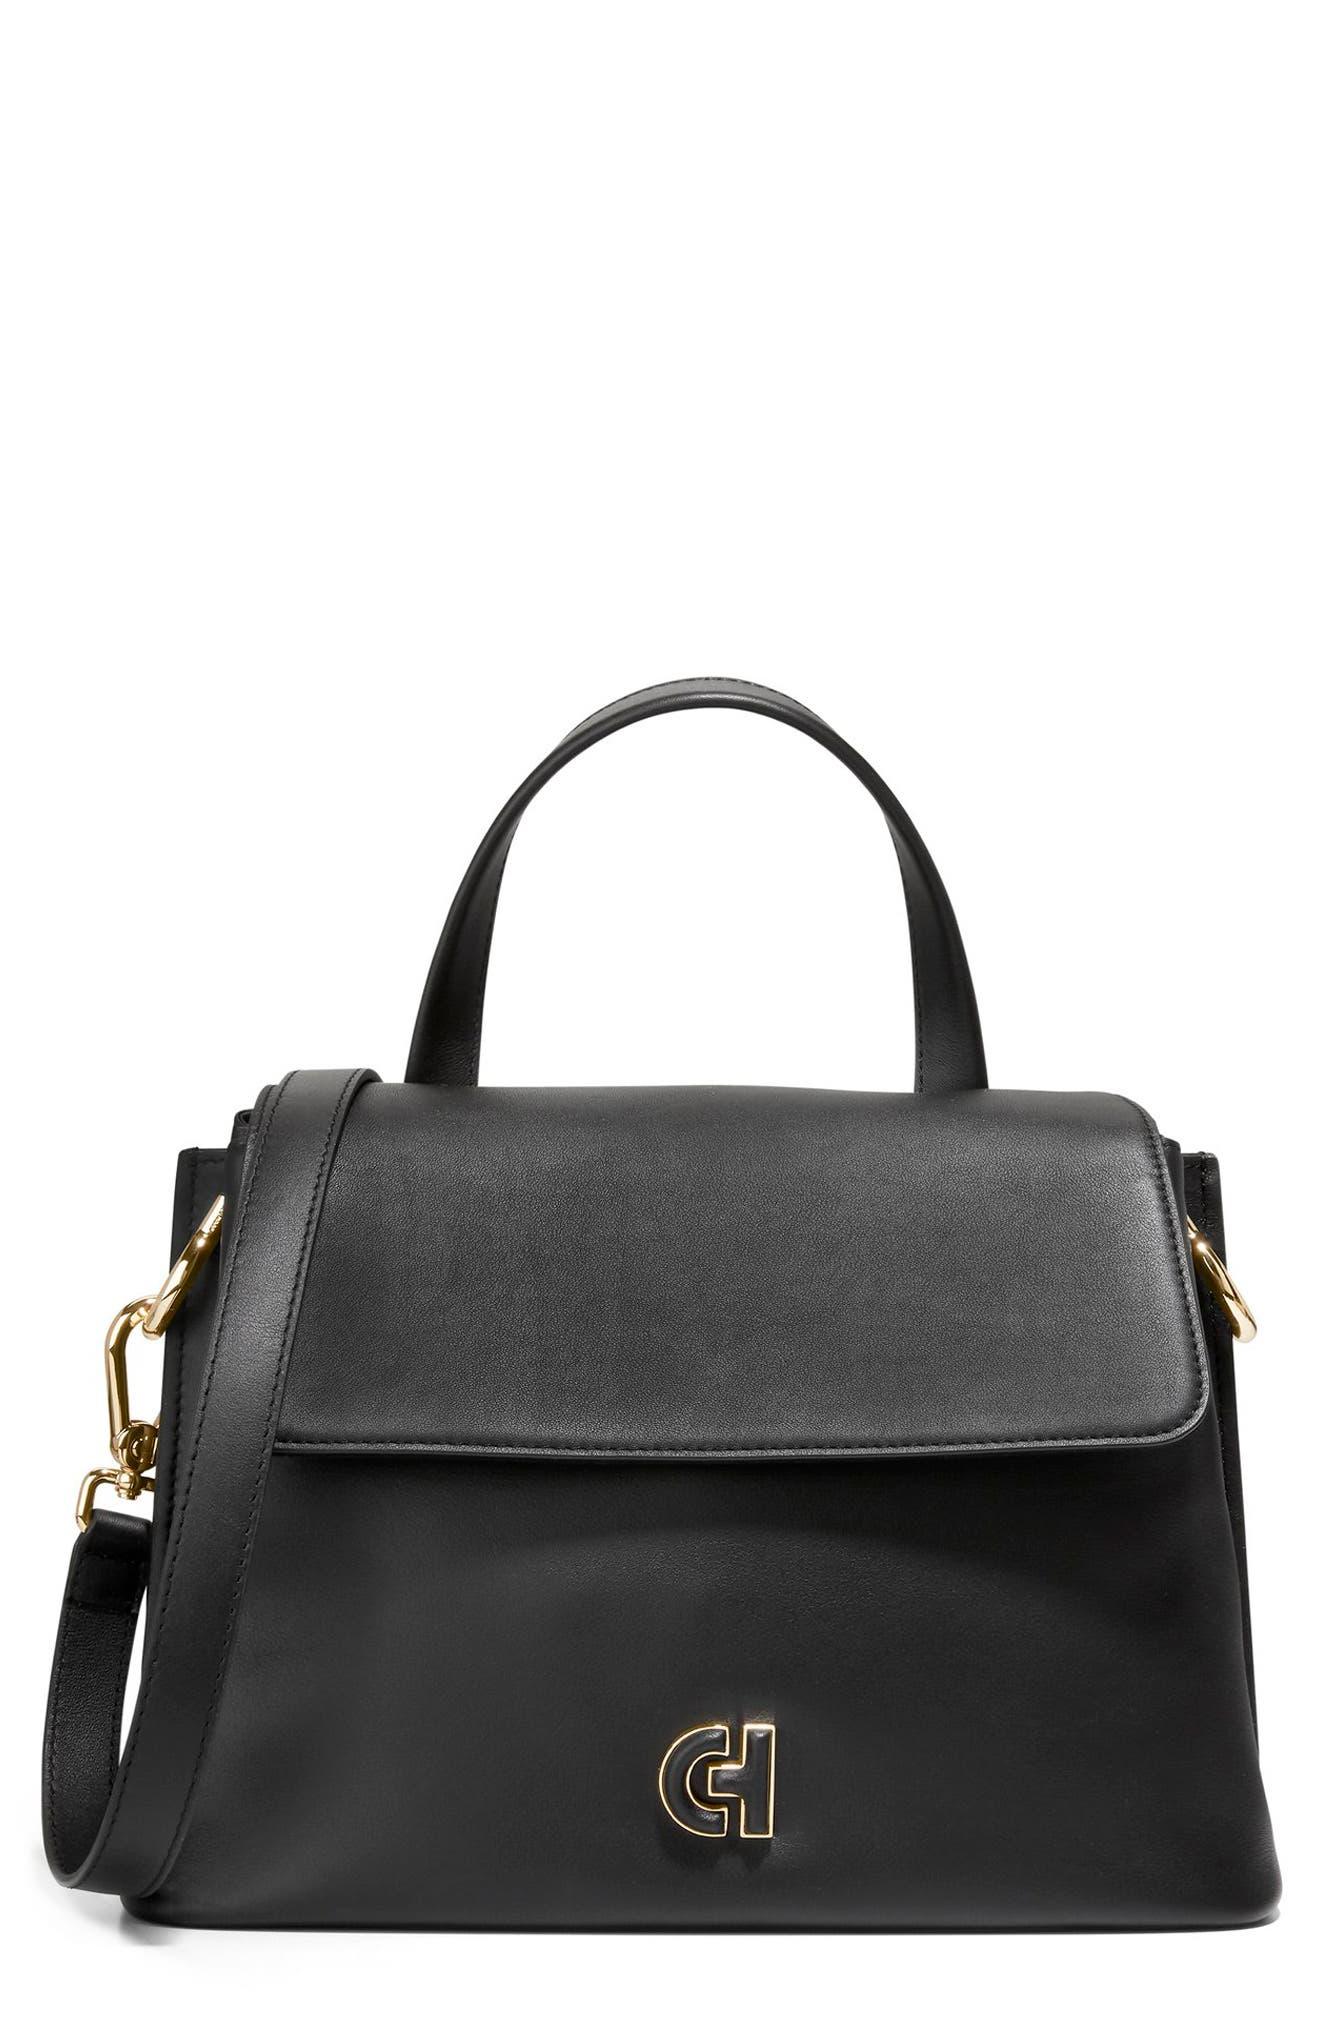 Cole Haan Grand Ambition Collective Leather Satchel in Black | Lyst